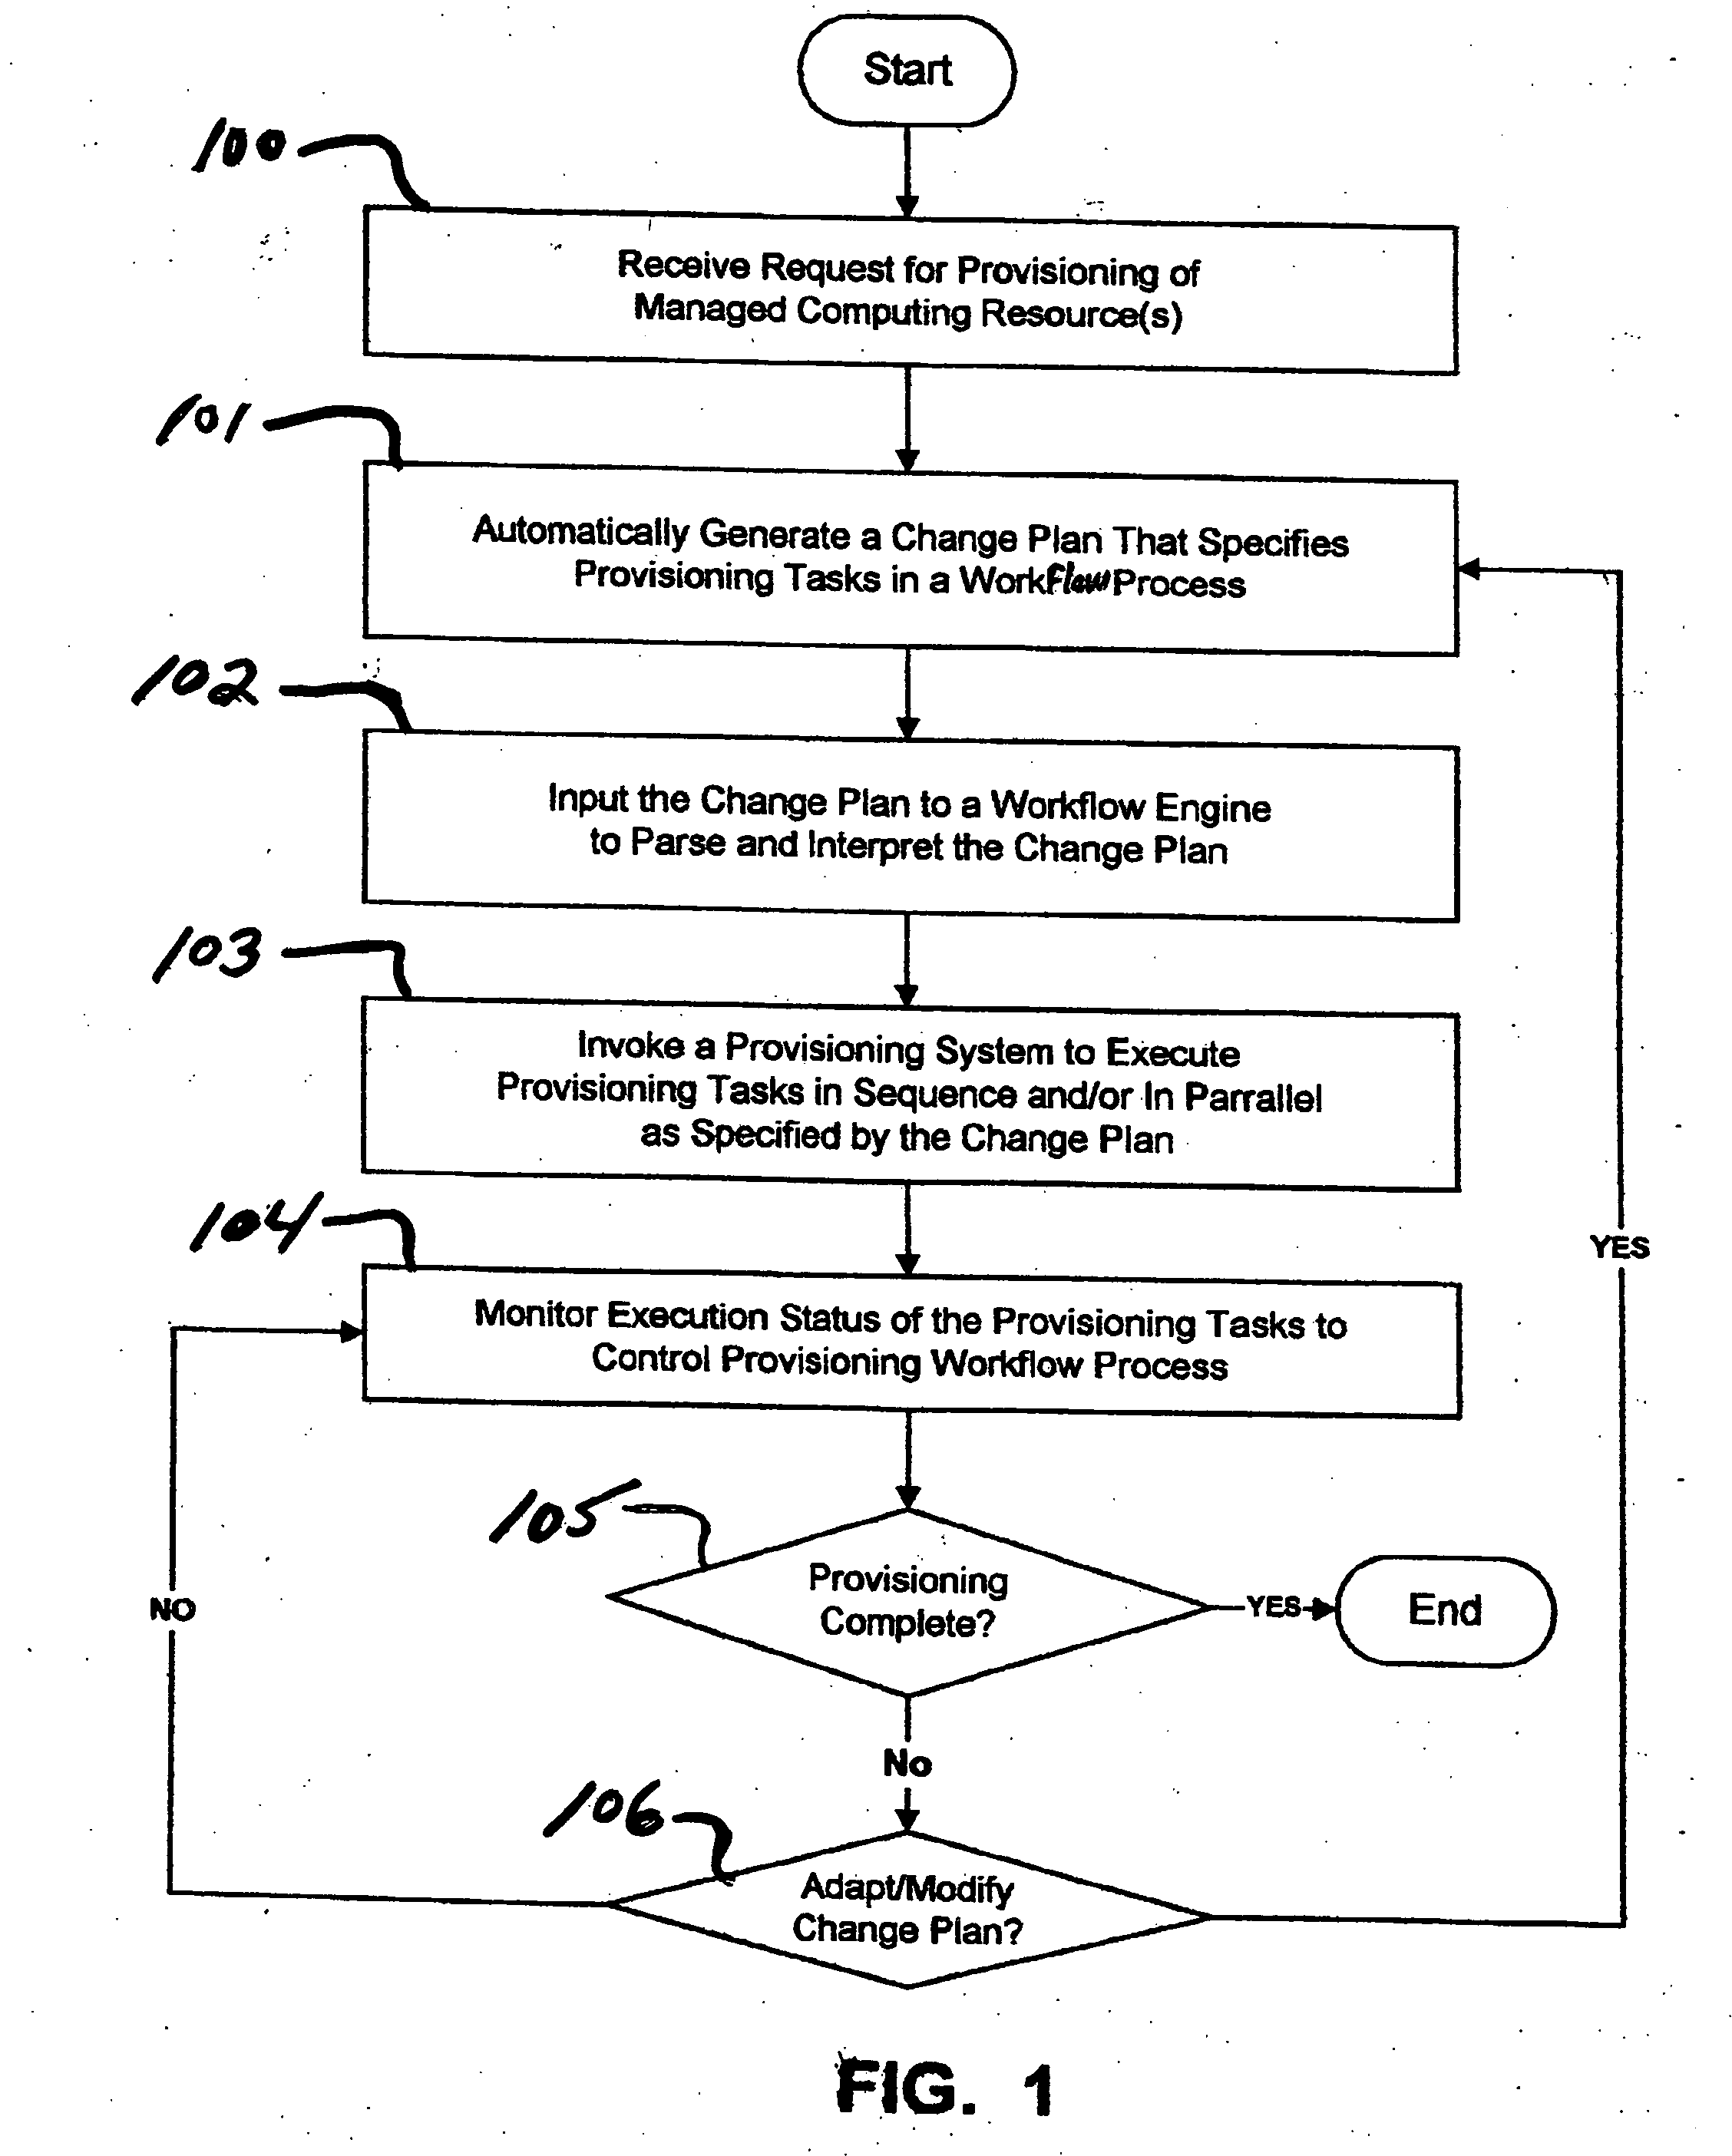 Systems and methods for automated provisioning of managed computing resources